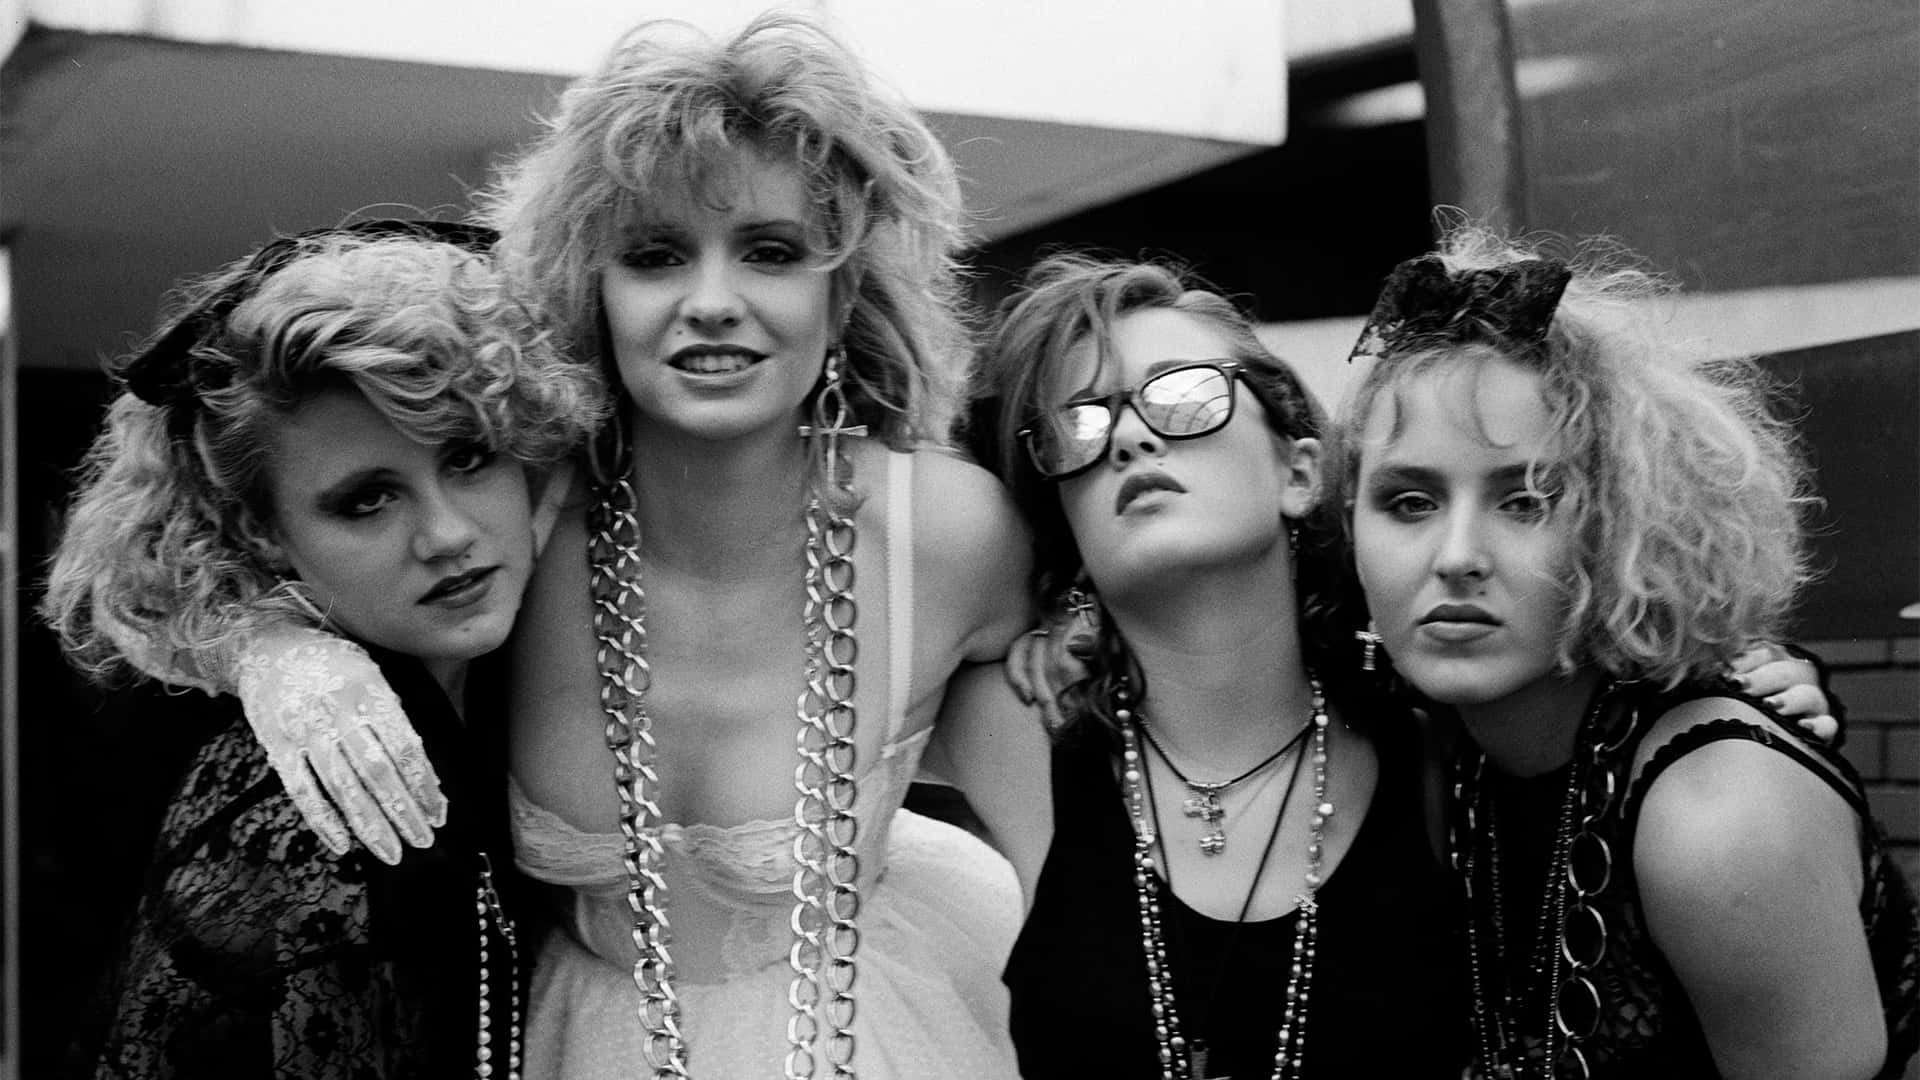 A blast from the past: experiencing the vibrant vibe of the ‘80s